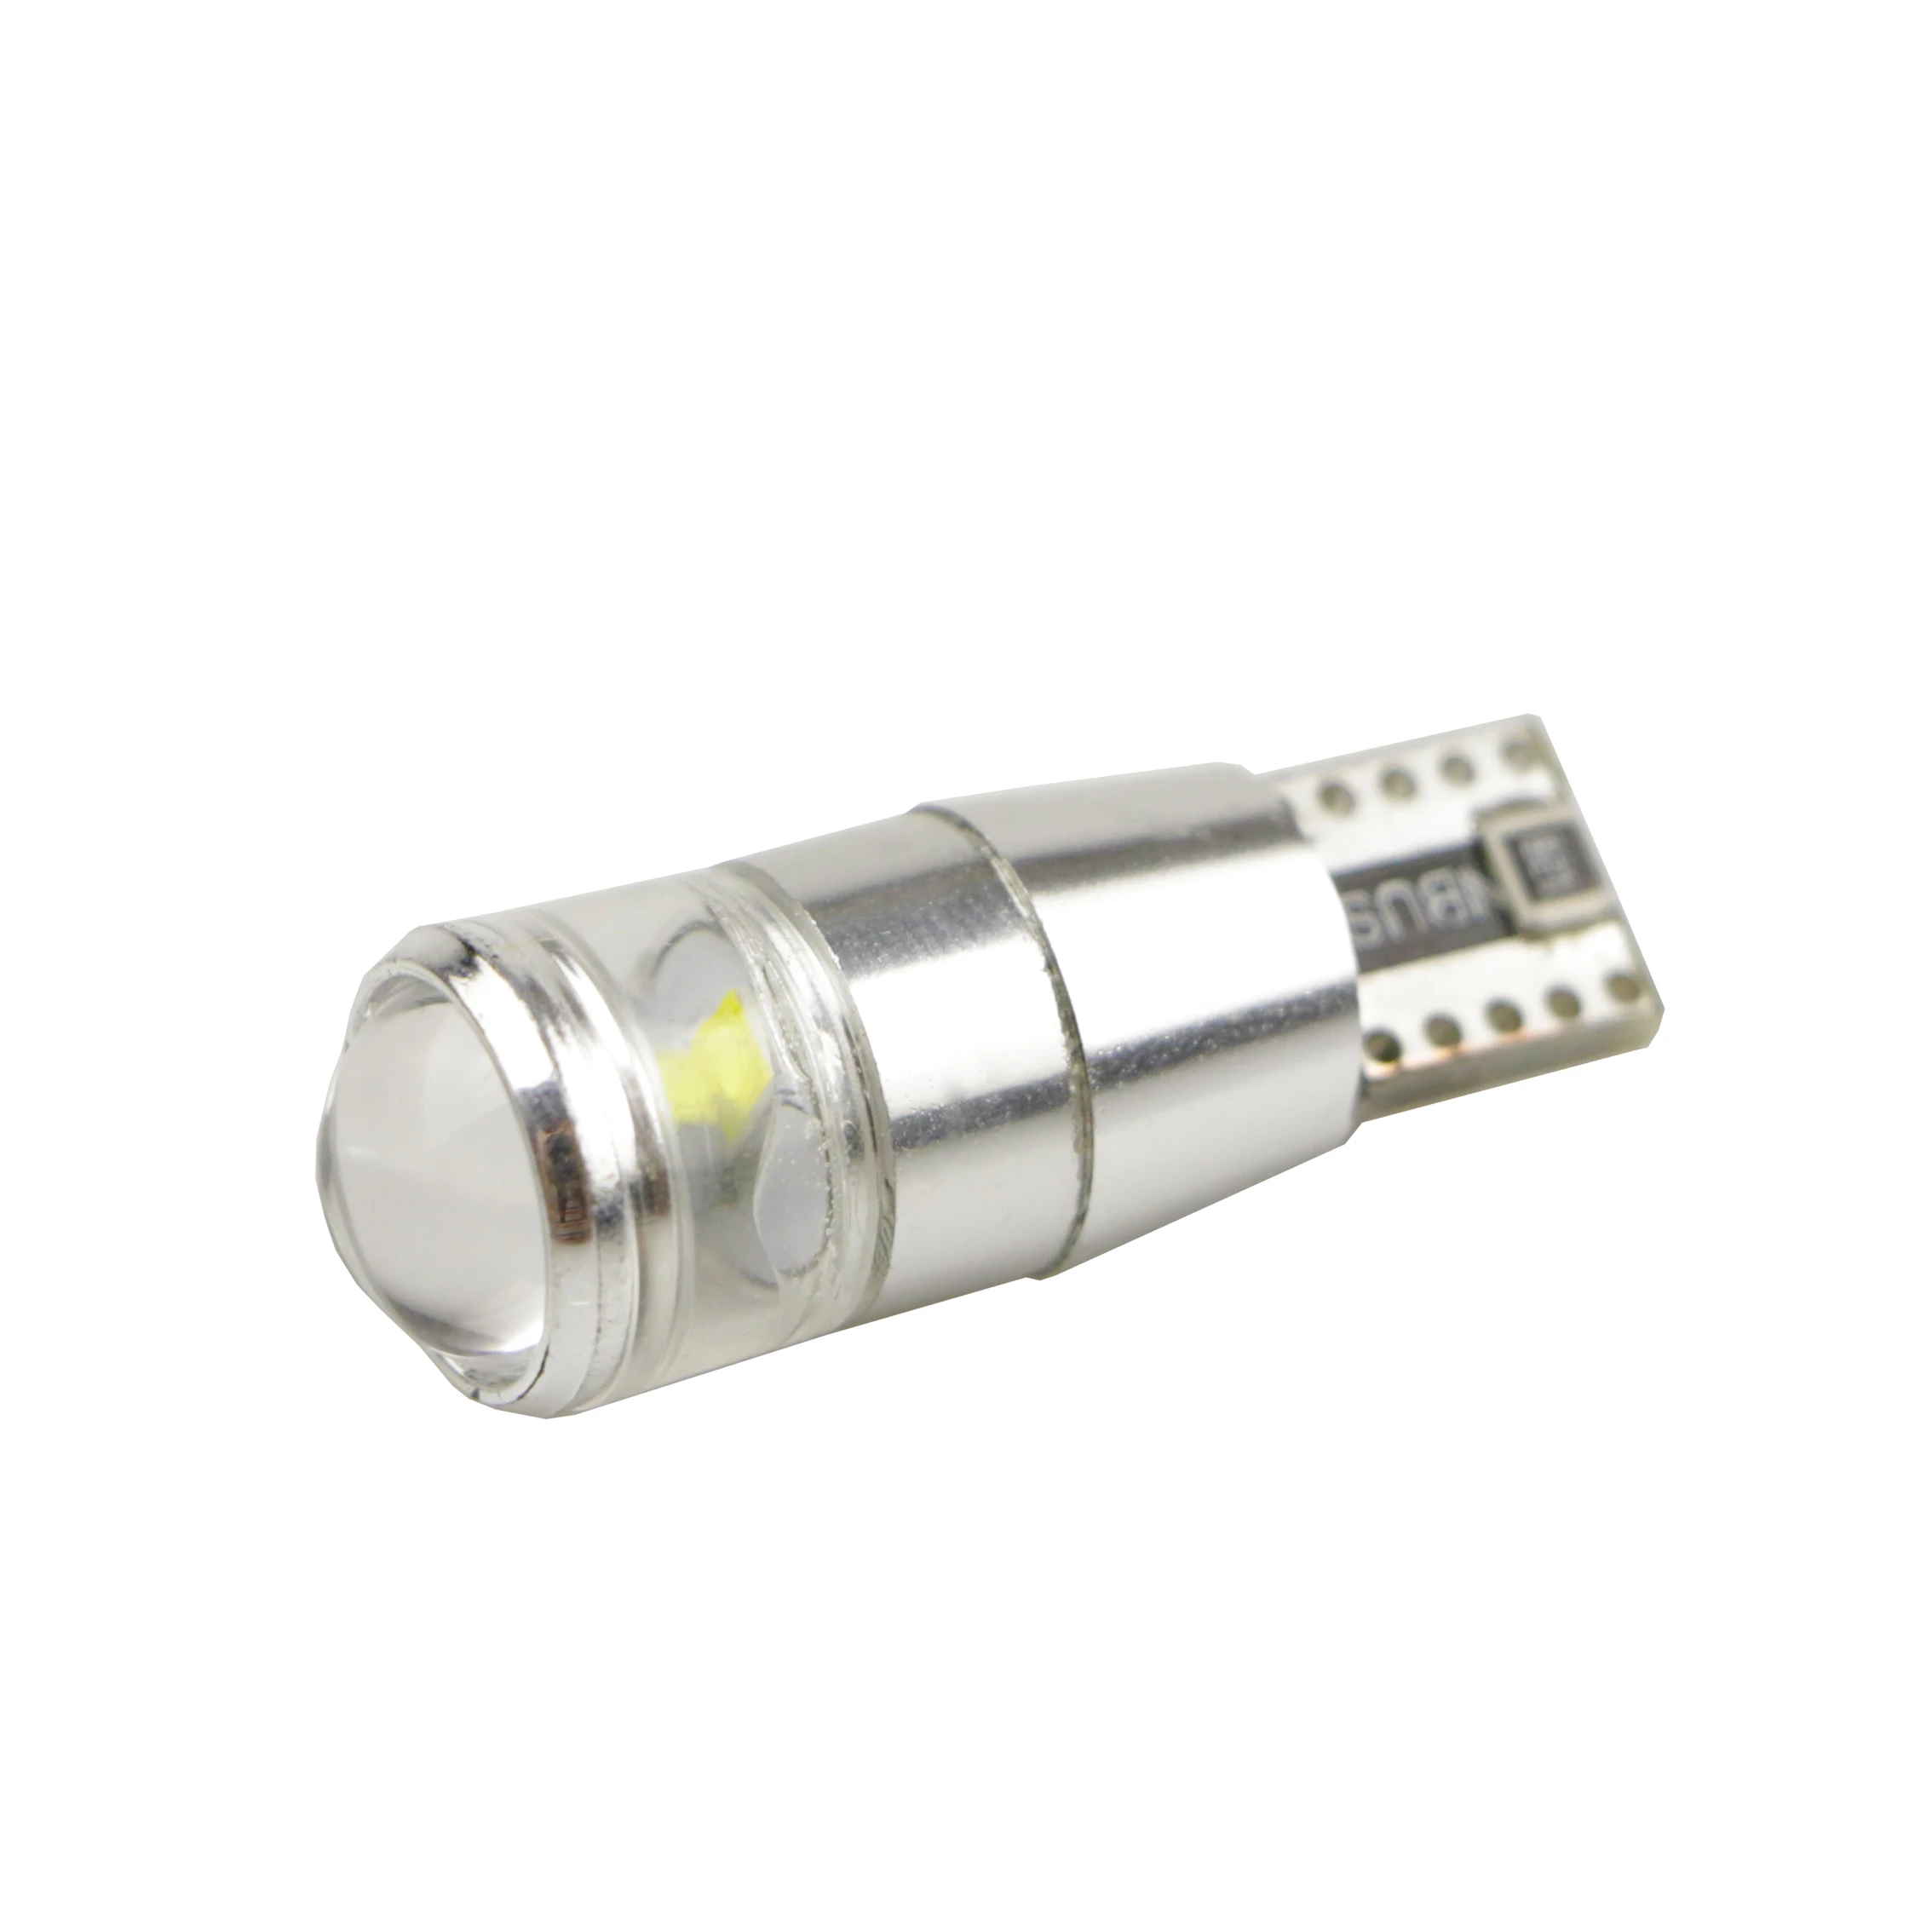 Well Designed T10 6smd xbds Car Light Decoding Brightest Led W5w  Width Instrument Indicator Lamp Parts For car